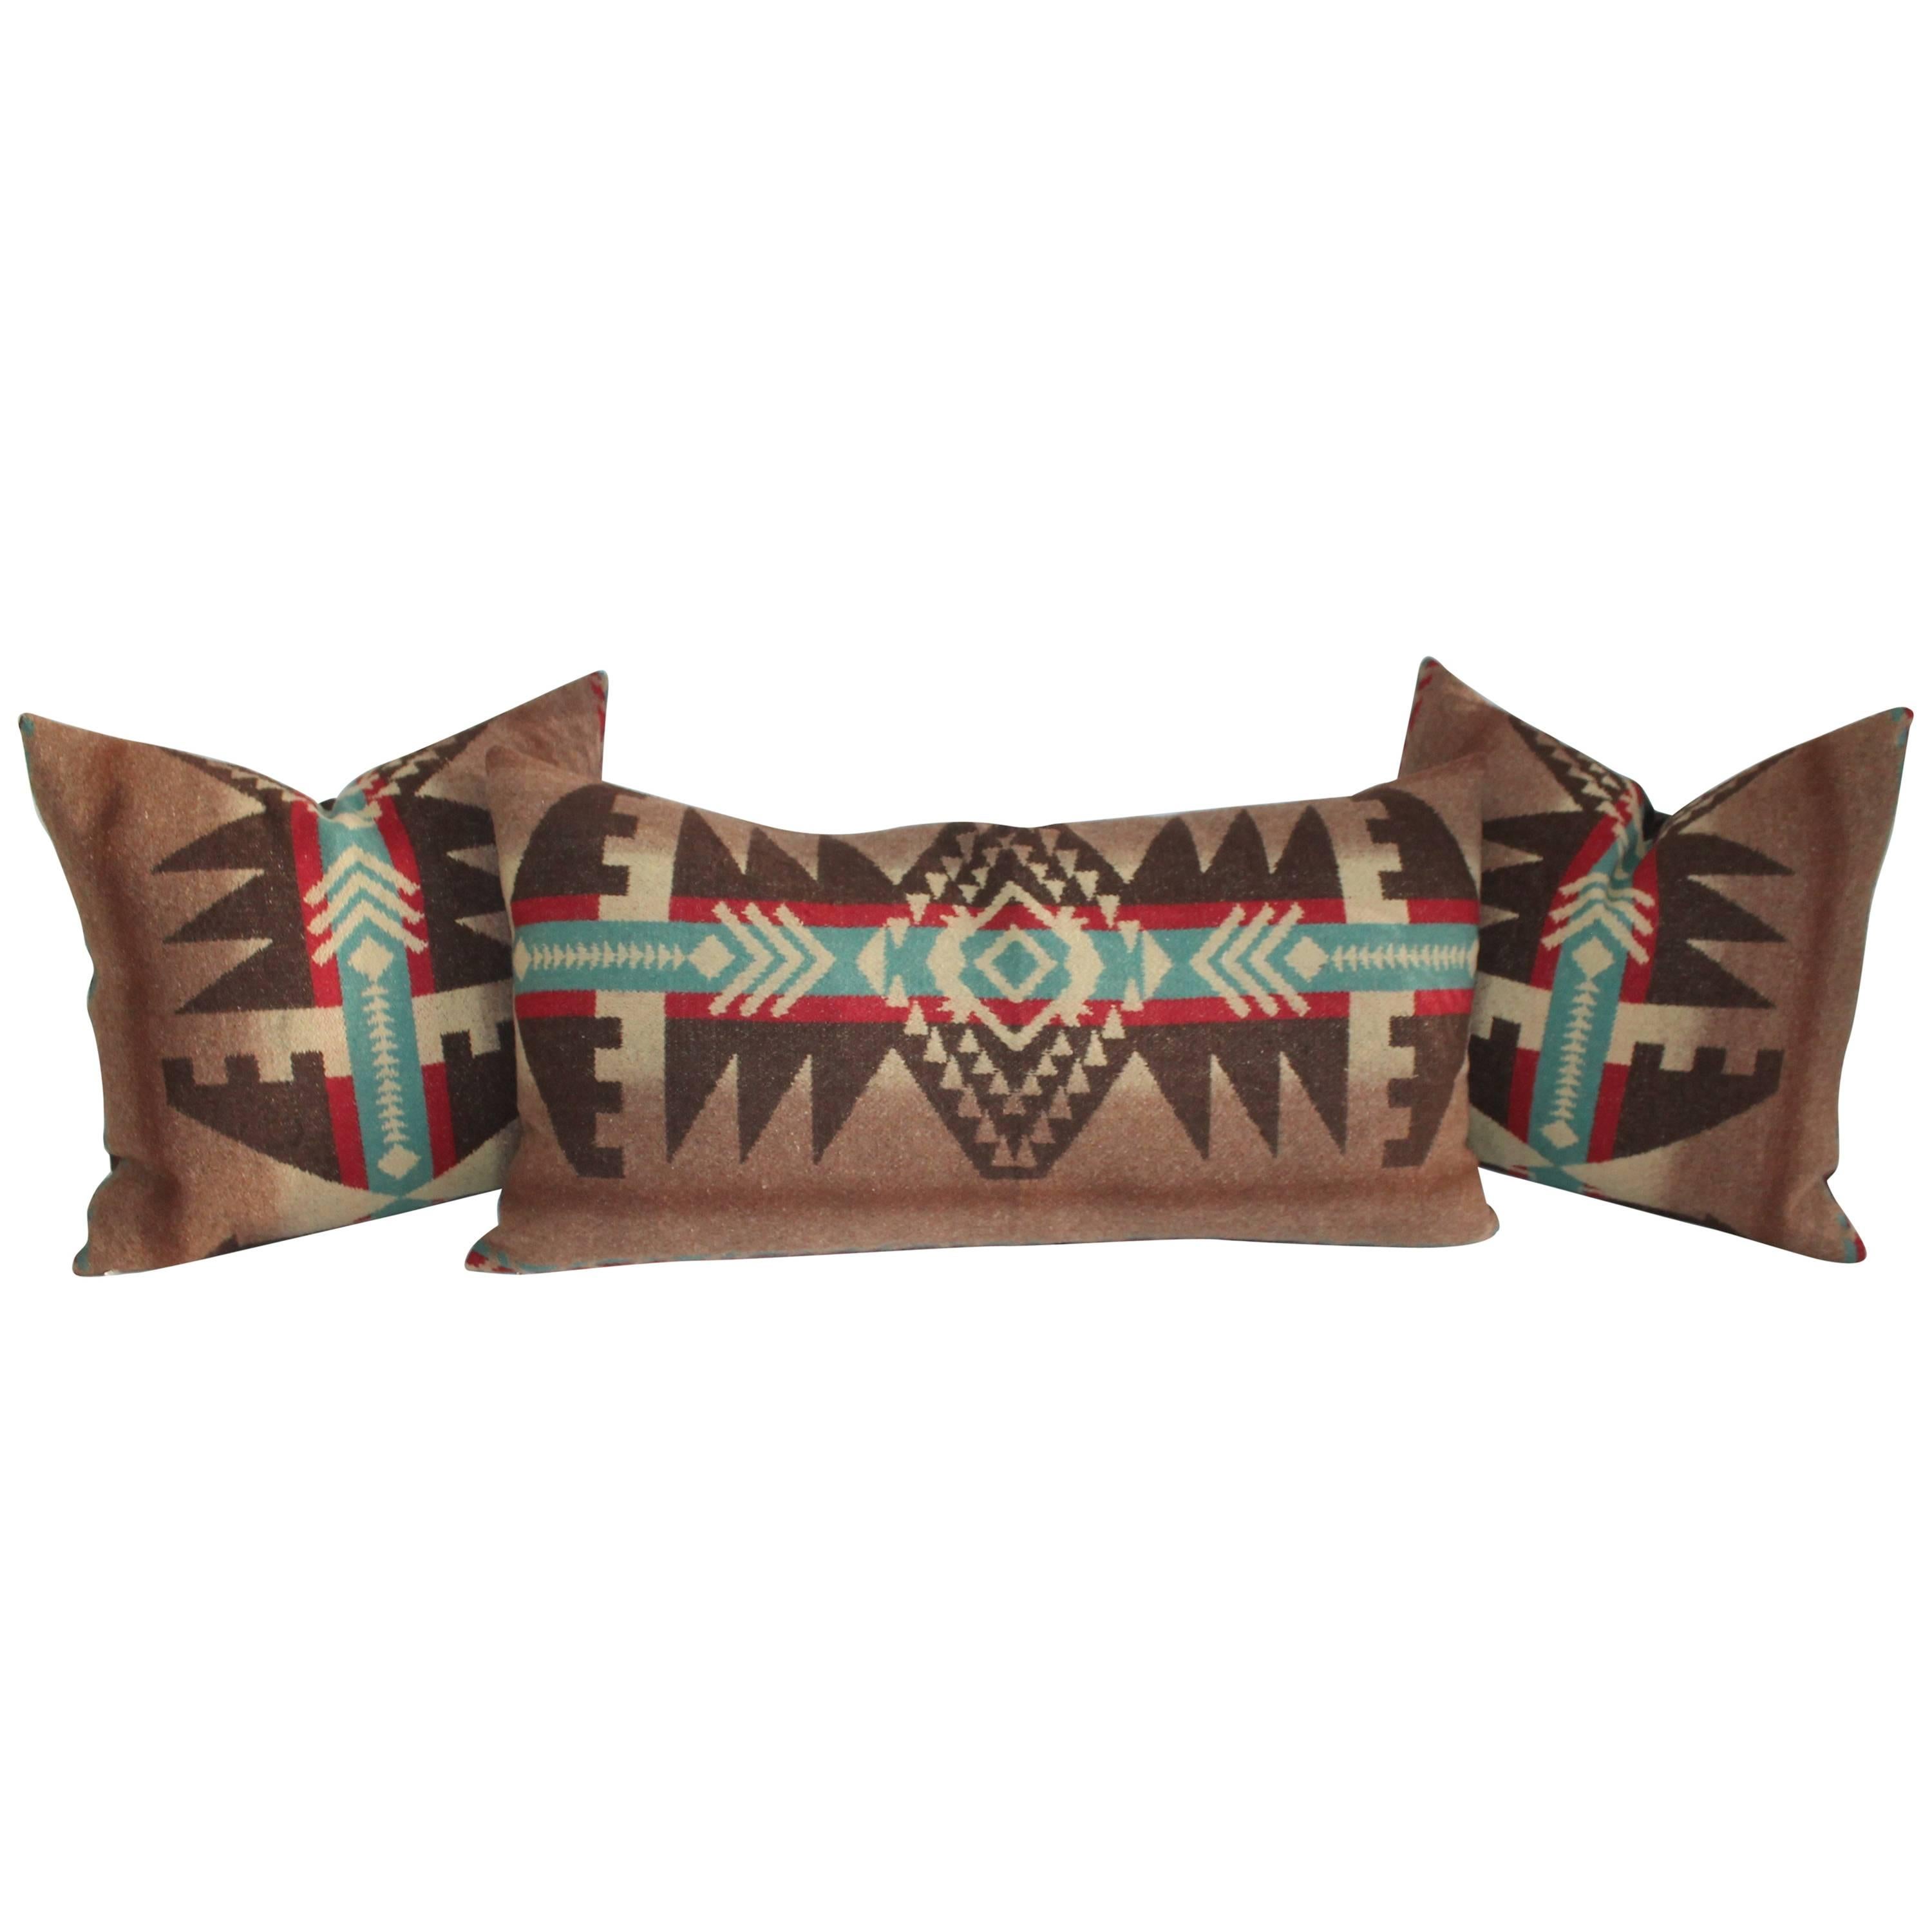 Group of Three Indian Design Camp Blanket Pillows